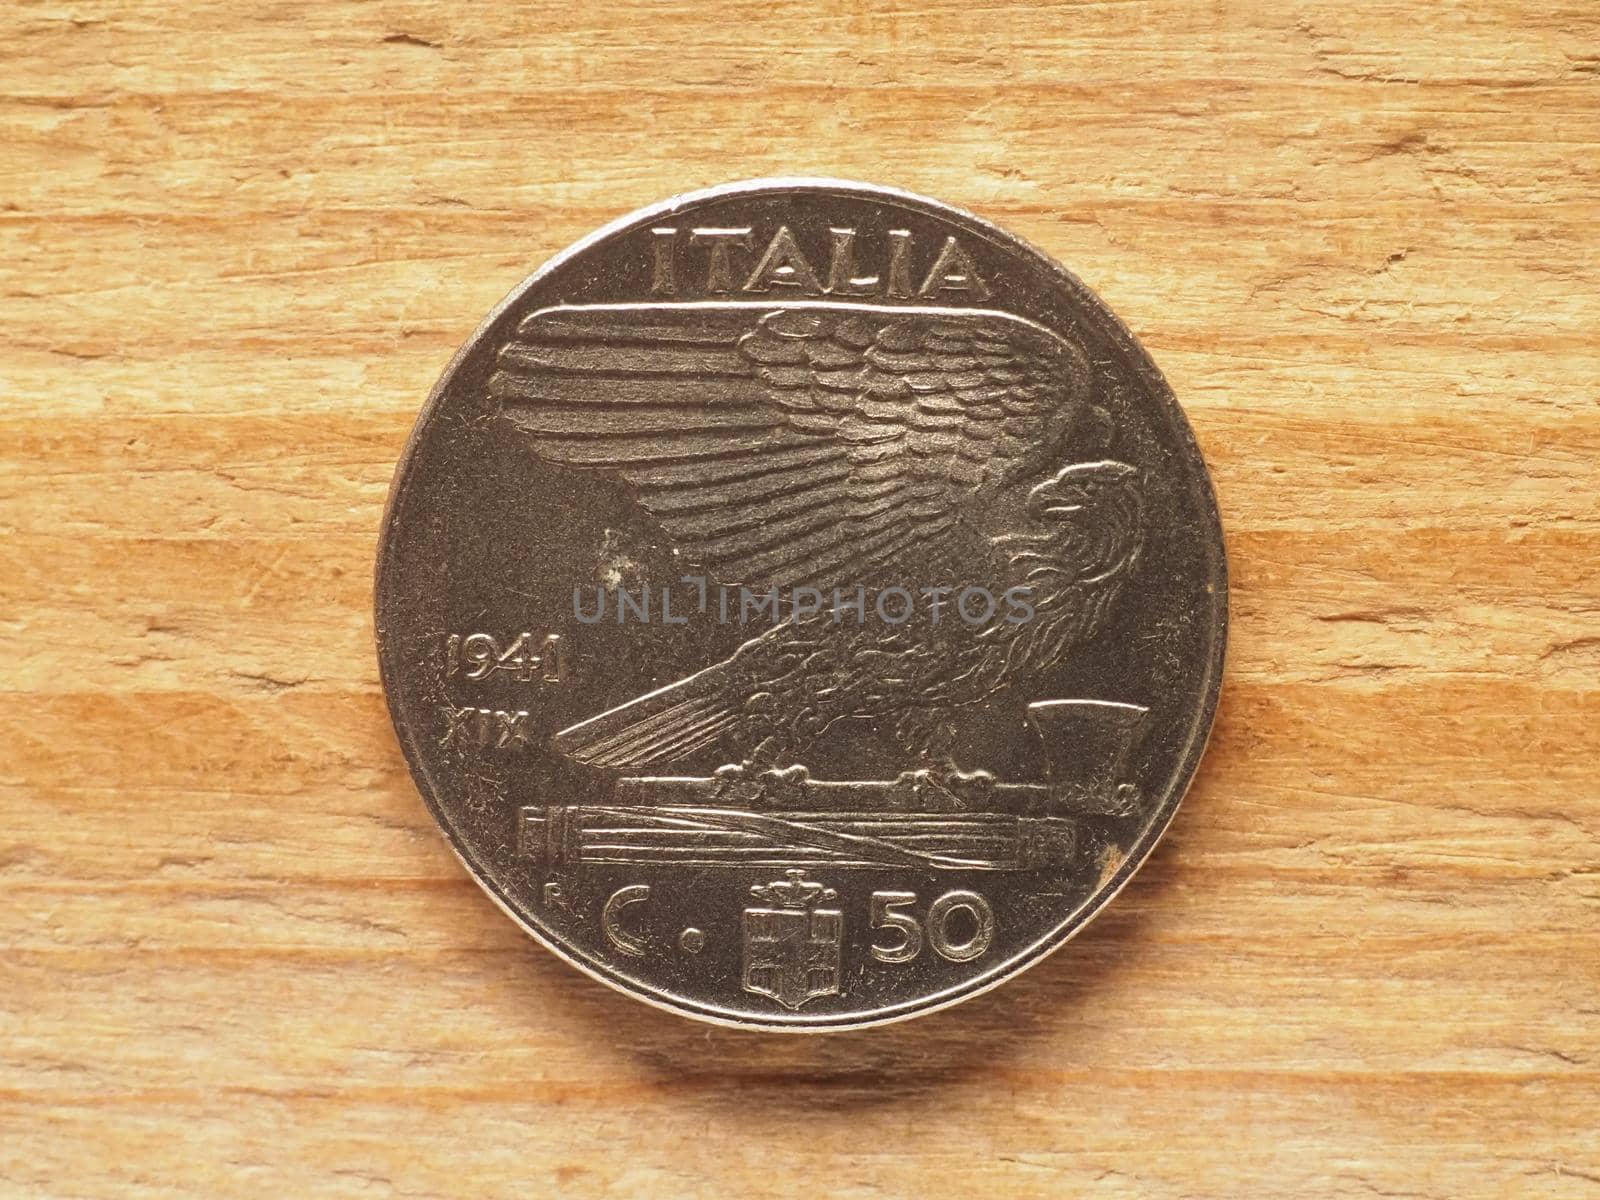 fifty cent coin reverse showing eagle, currency of Italian Kingdom